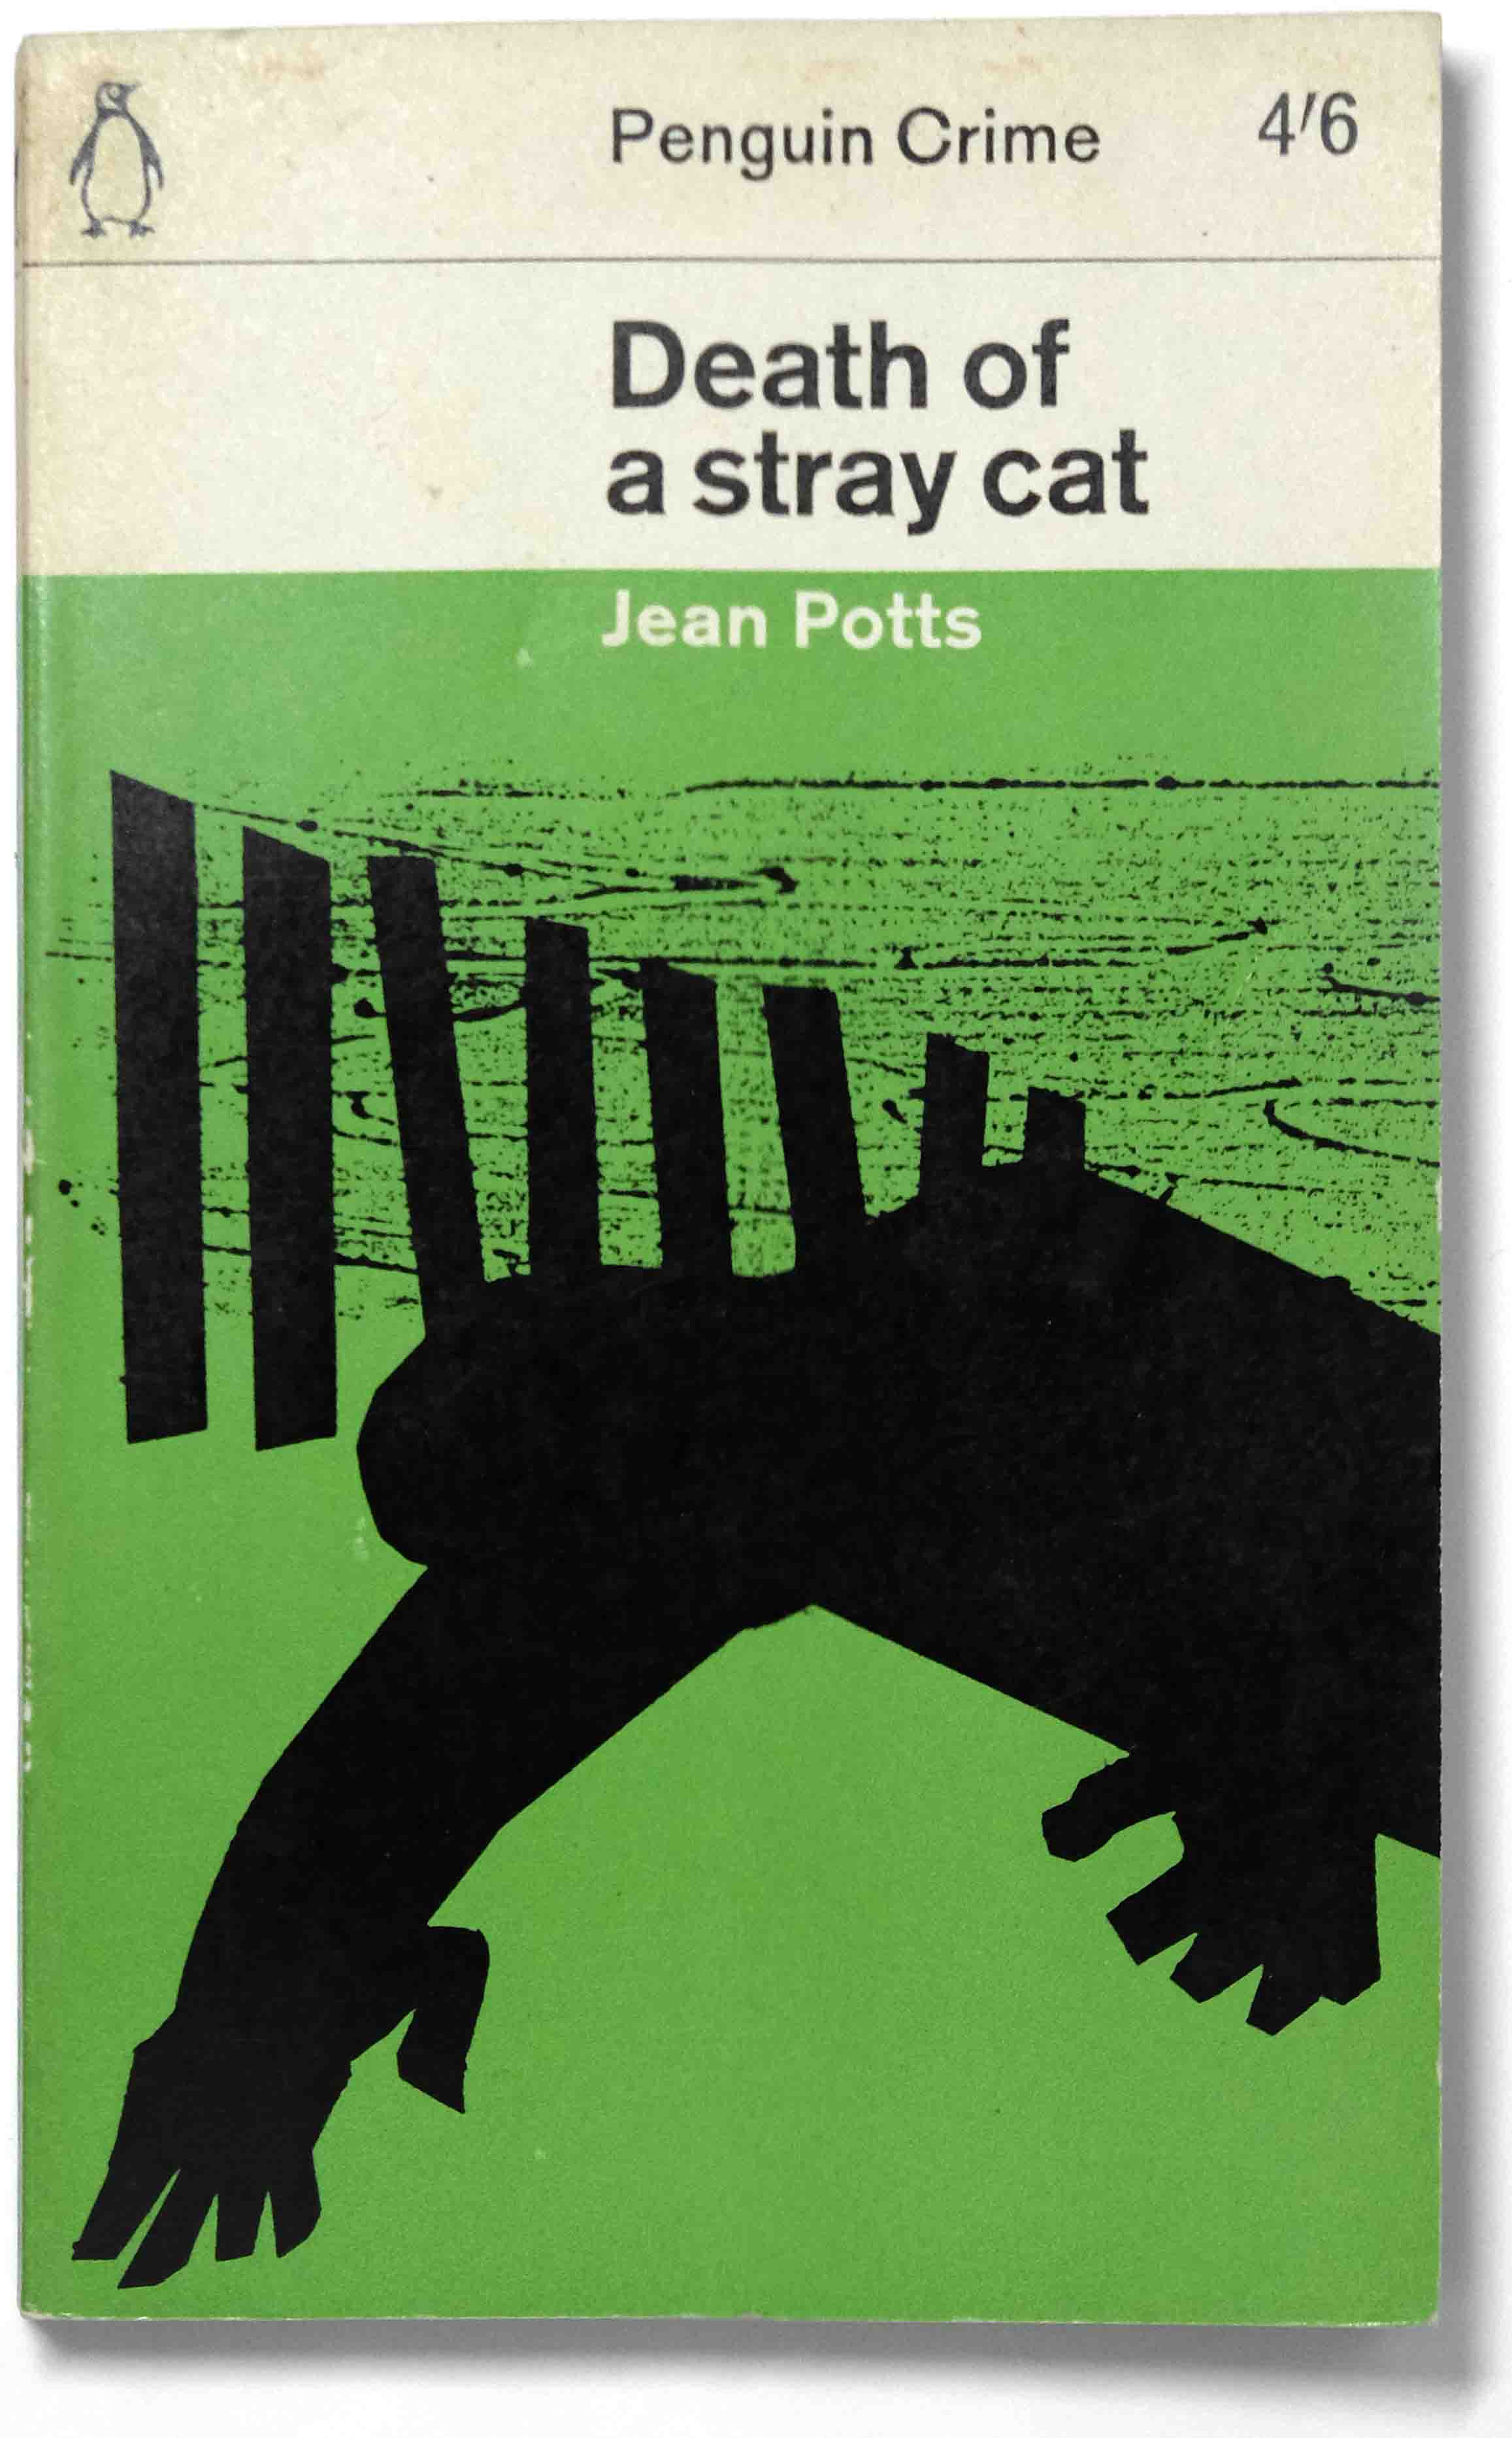 Penguin_Death of a Cat_Jean Potts_cover by Romek Marber